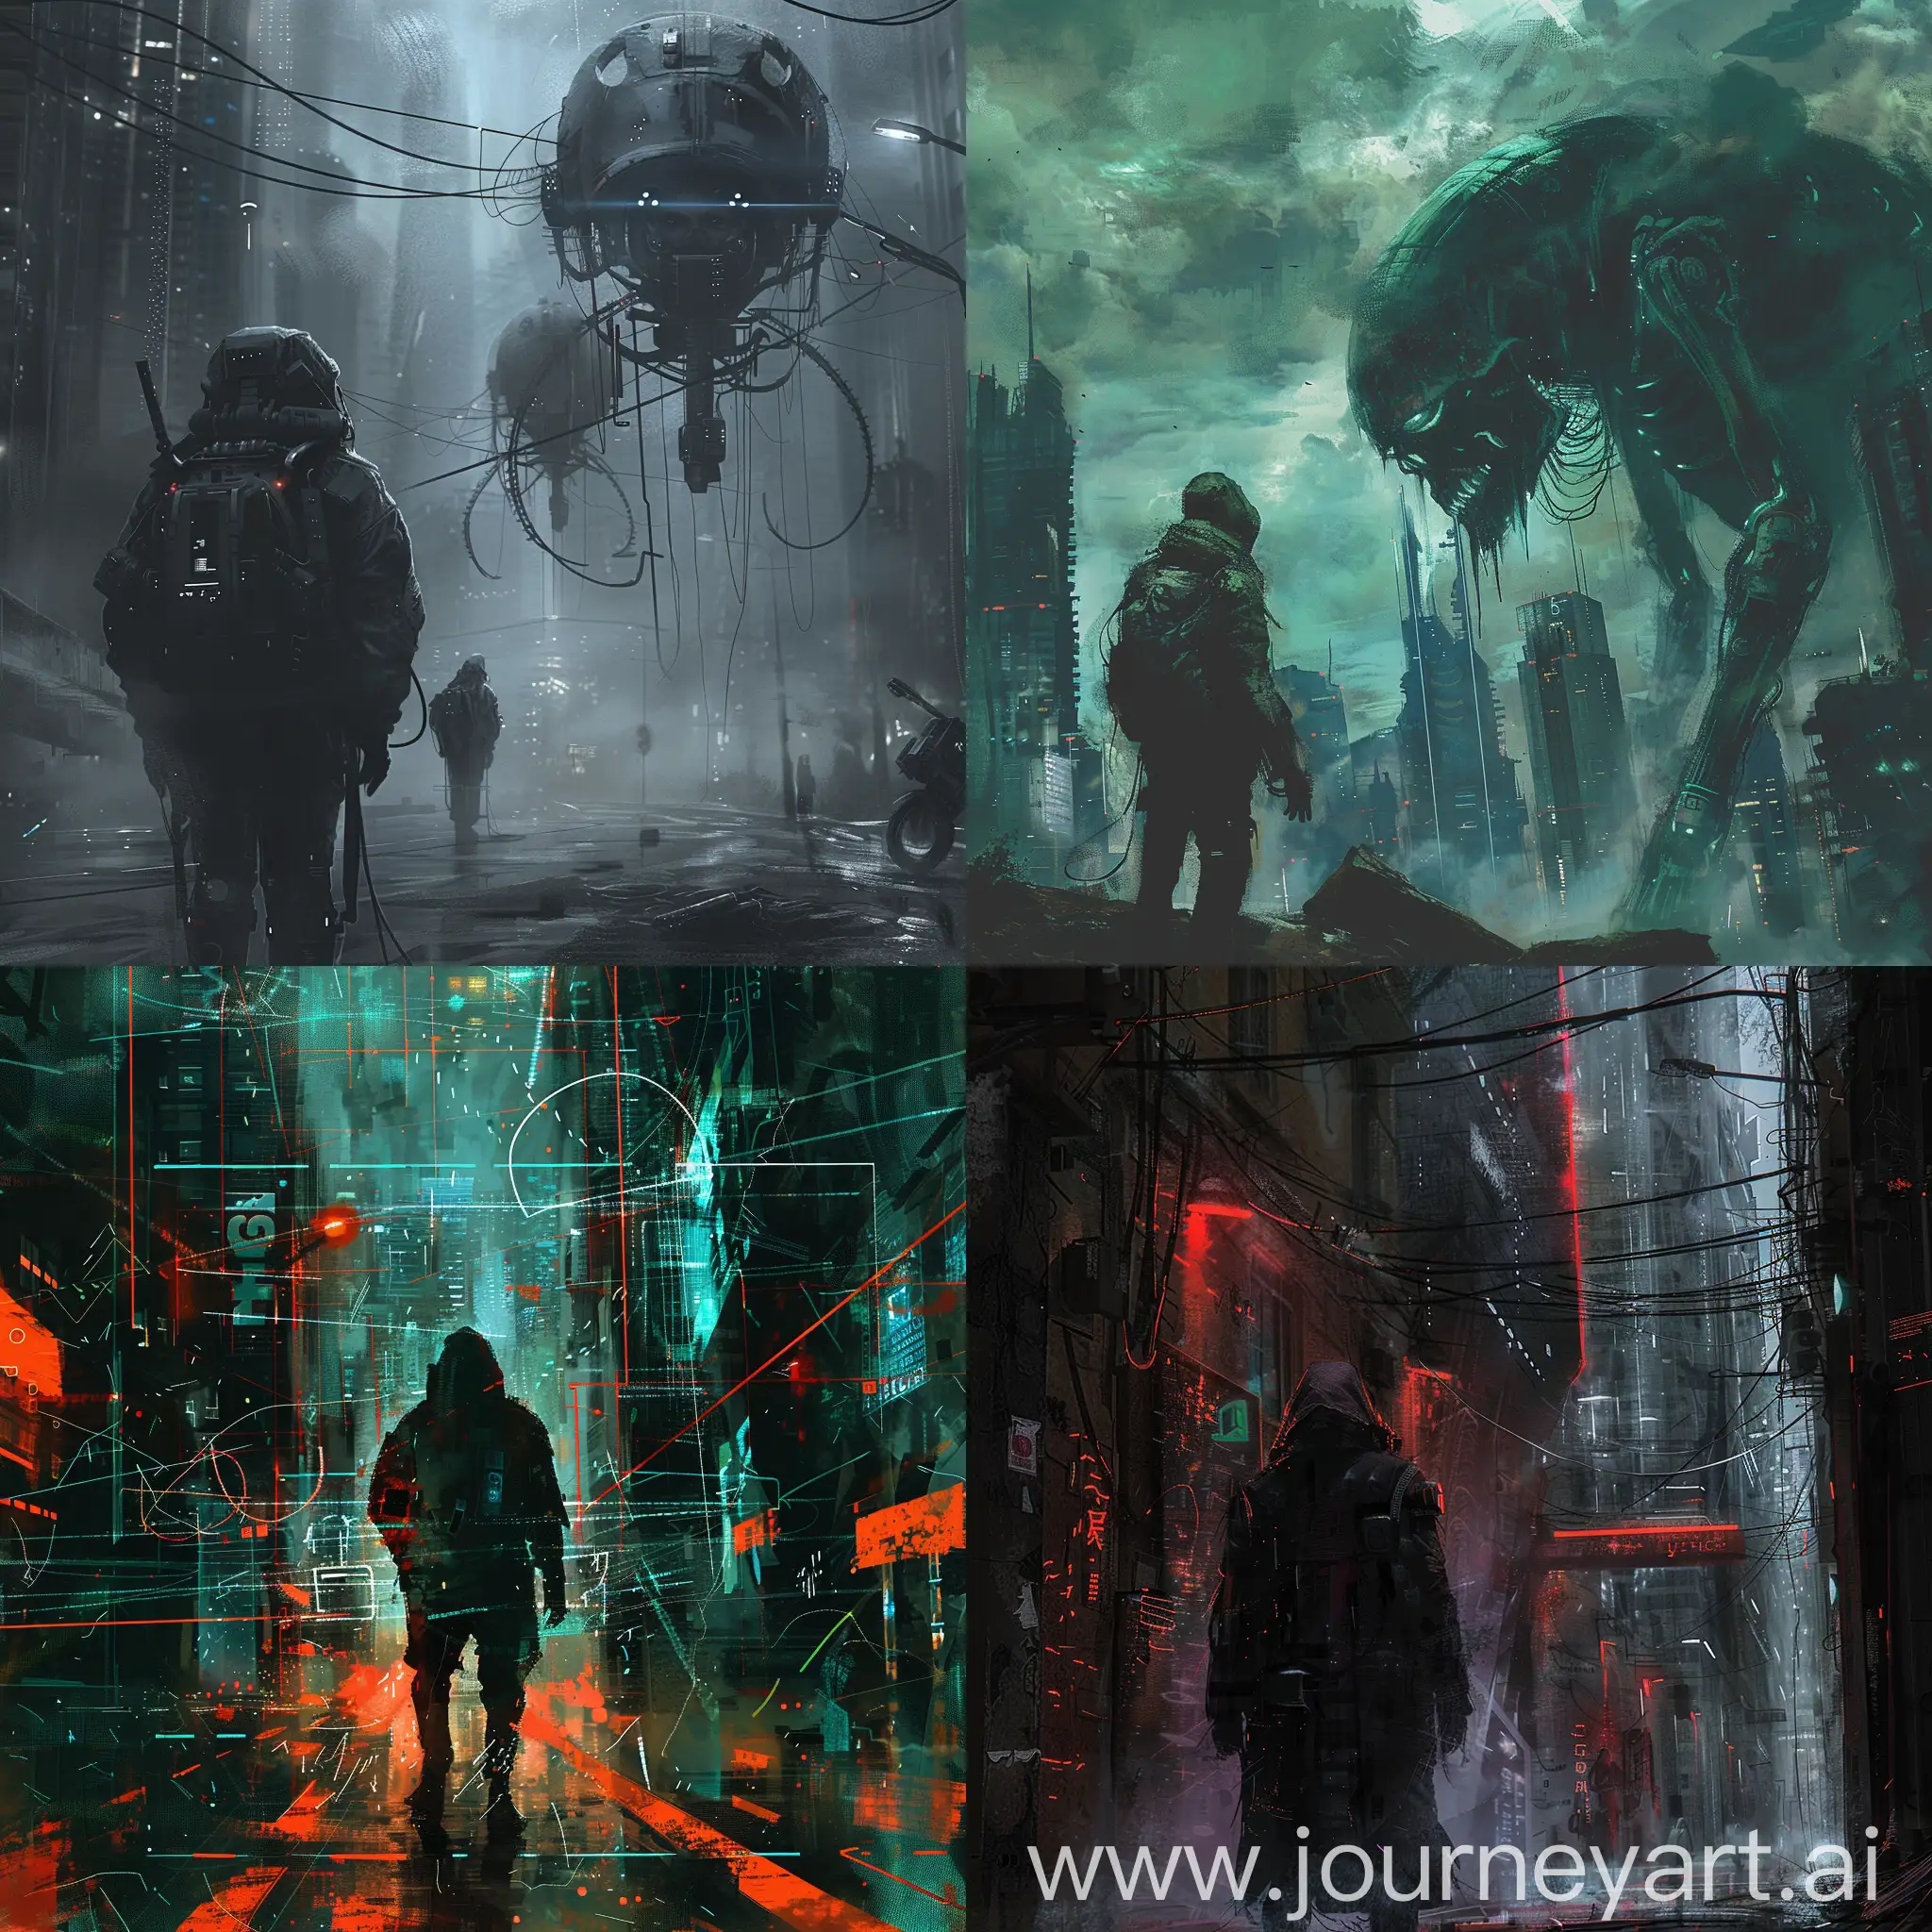 Futuristic-Stalker-and-Technology-Encounter-Art